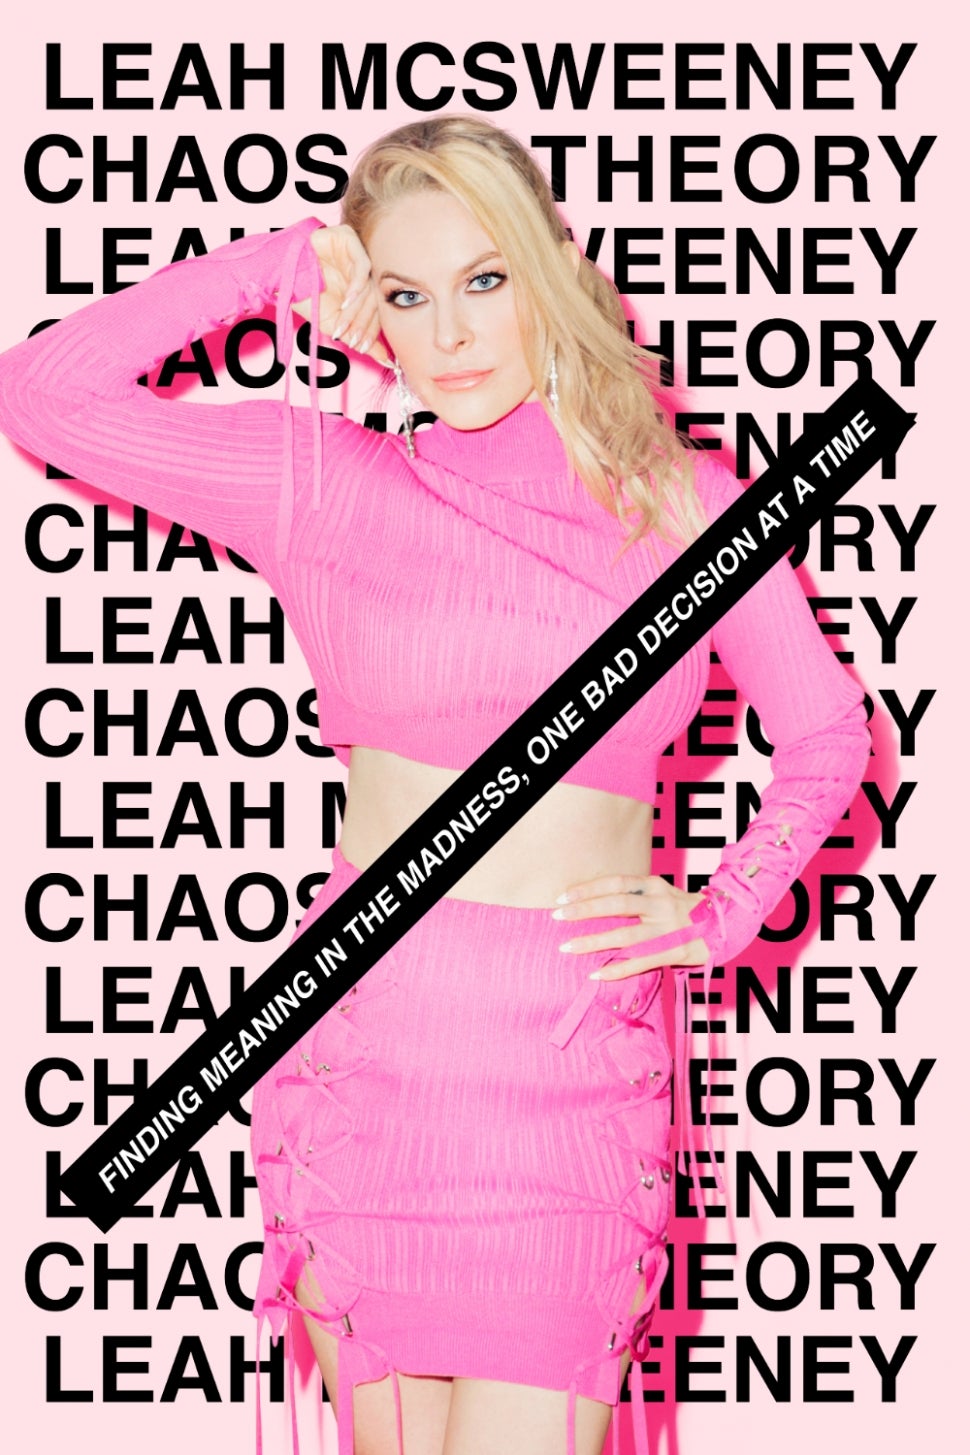 Leah McSweeney is pretty in pink on the cover of her debut book, Chaos Theory